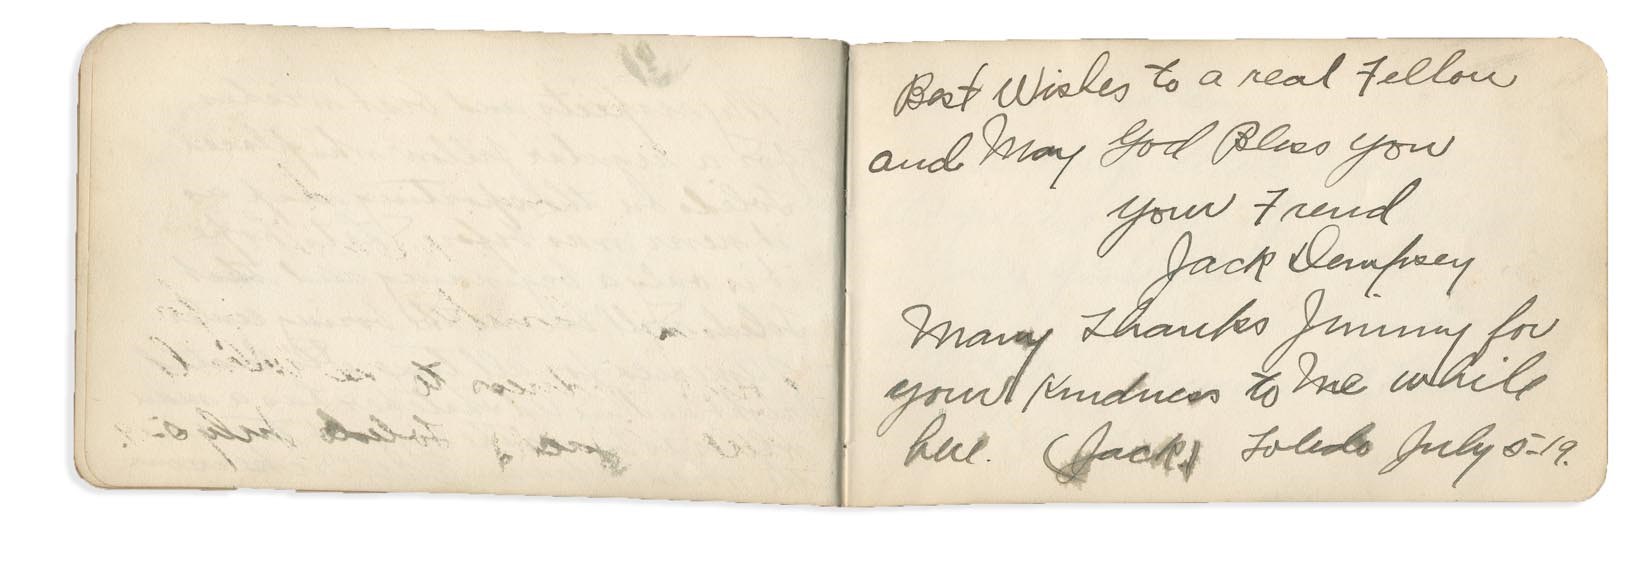 - The First Known Autograph Signed by Jack Dempsey as World's Champion